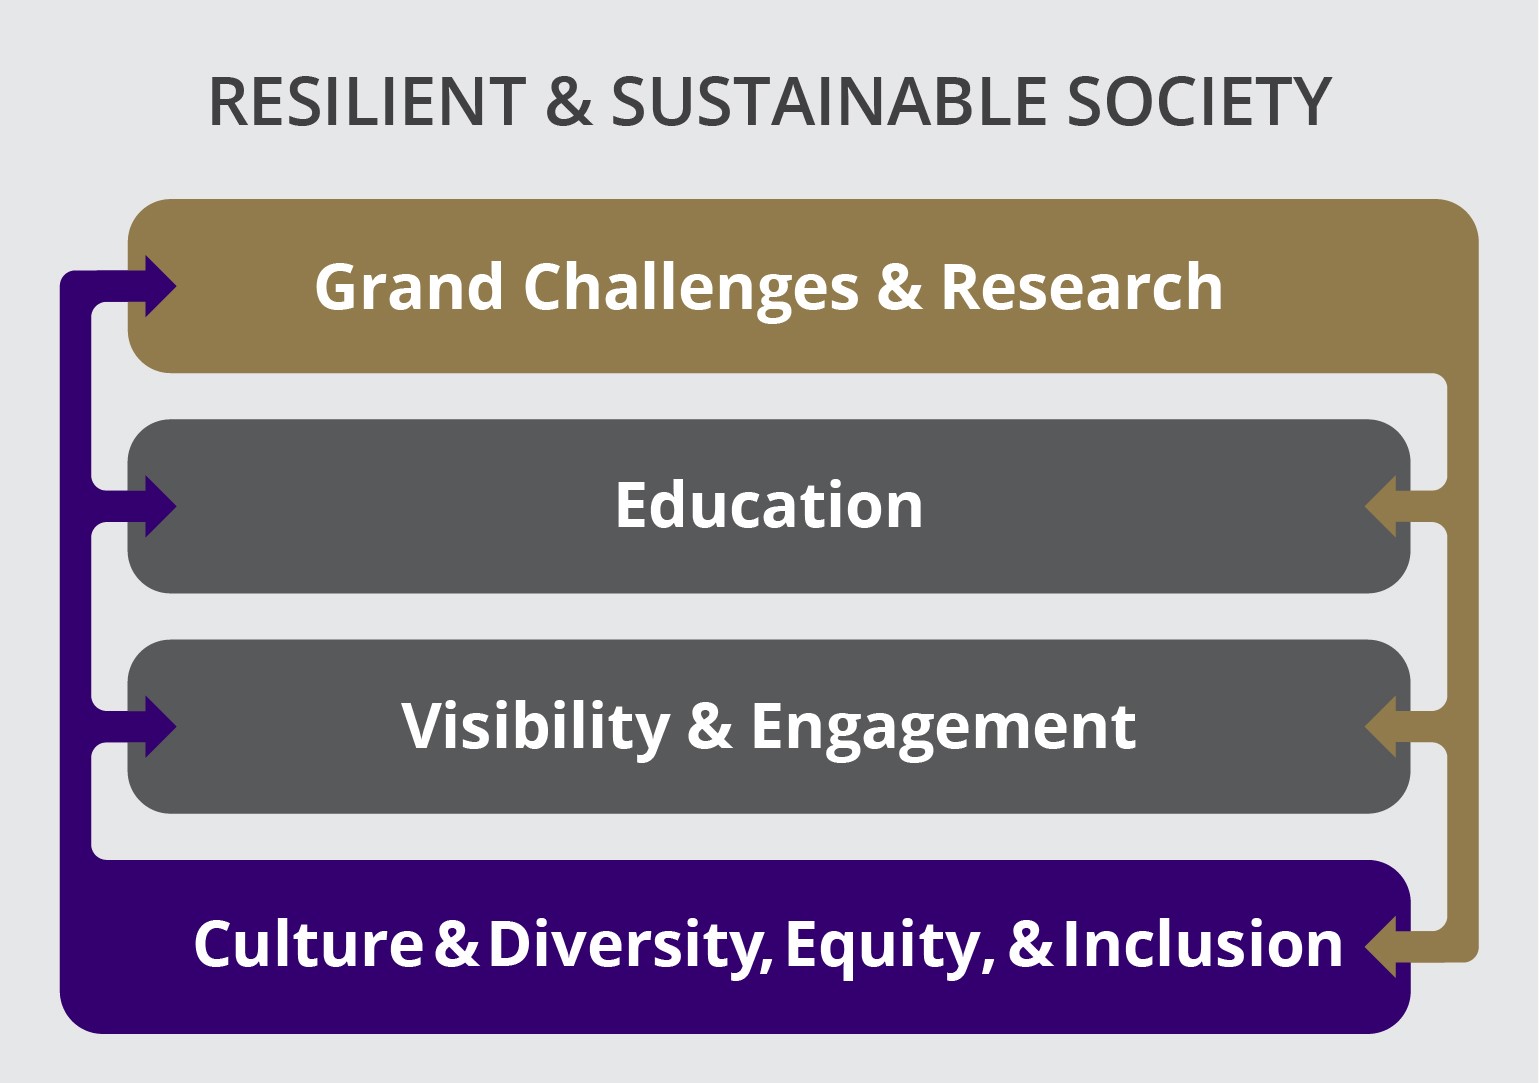 A graph titled 'Resilient & sustainable society' showing the four pillars of CEE's strategic plan stacked one on top of the other: Grand Challenges & research; education; visibility & engagement; and culture & diversity, equity, and inclusion. The first and fourth pillars are connected with arrows to all of the other pillars, to show that Grand Challenges & research and also culture & diversity, equity and inclusion, are woven throughout and support the work of the other pillars.